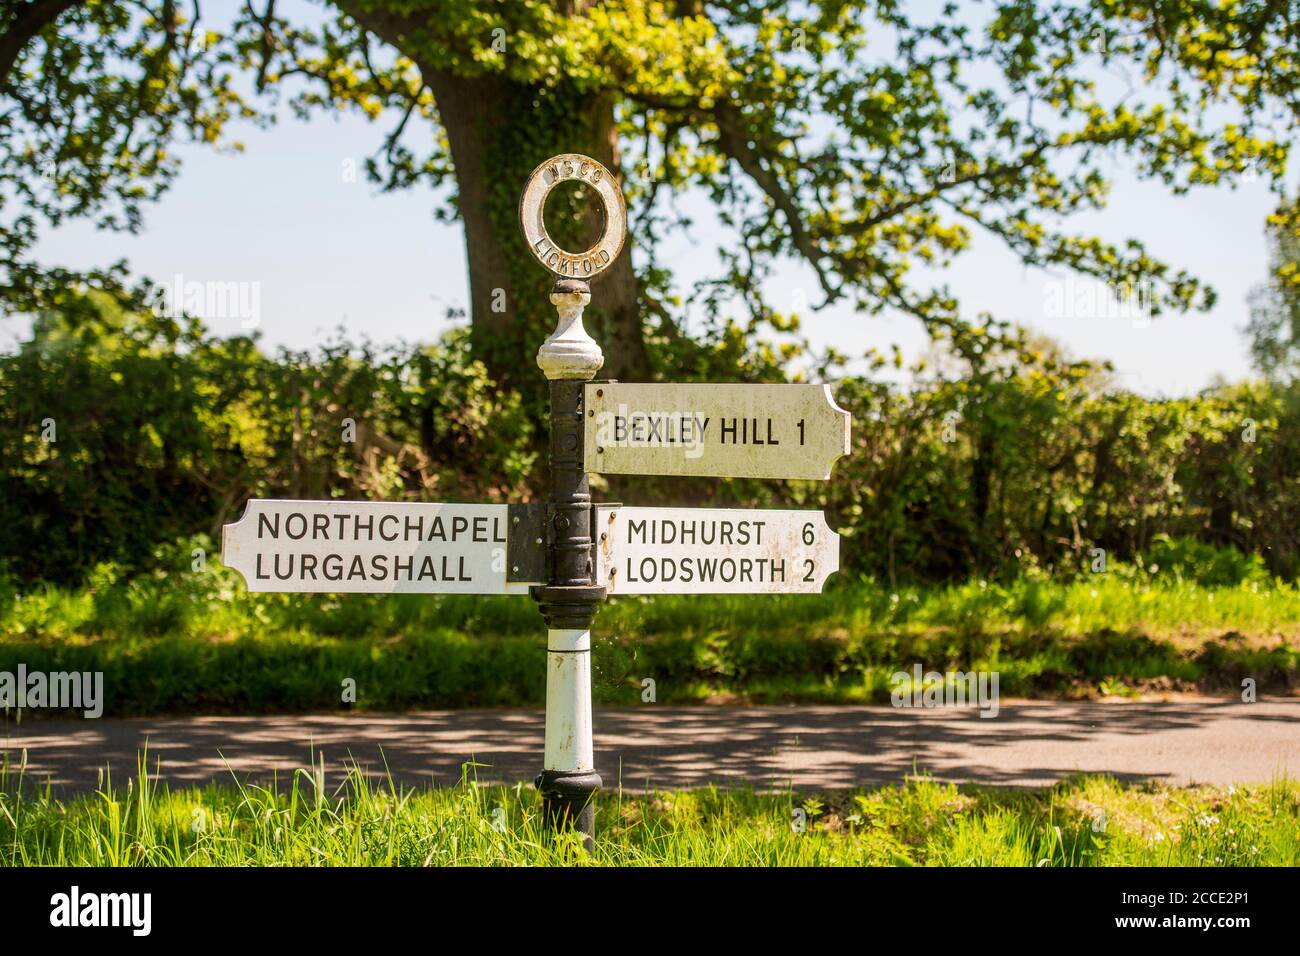 A signpost in the village of Lickfold. Destinations on the fingerpost are to Bexley Hill, Midhurst, Lodsworth, Northchapel, and Lurgashall. Stock Photo